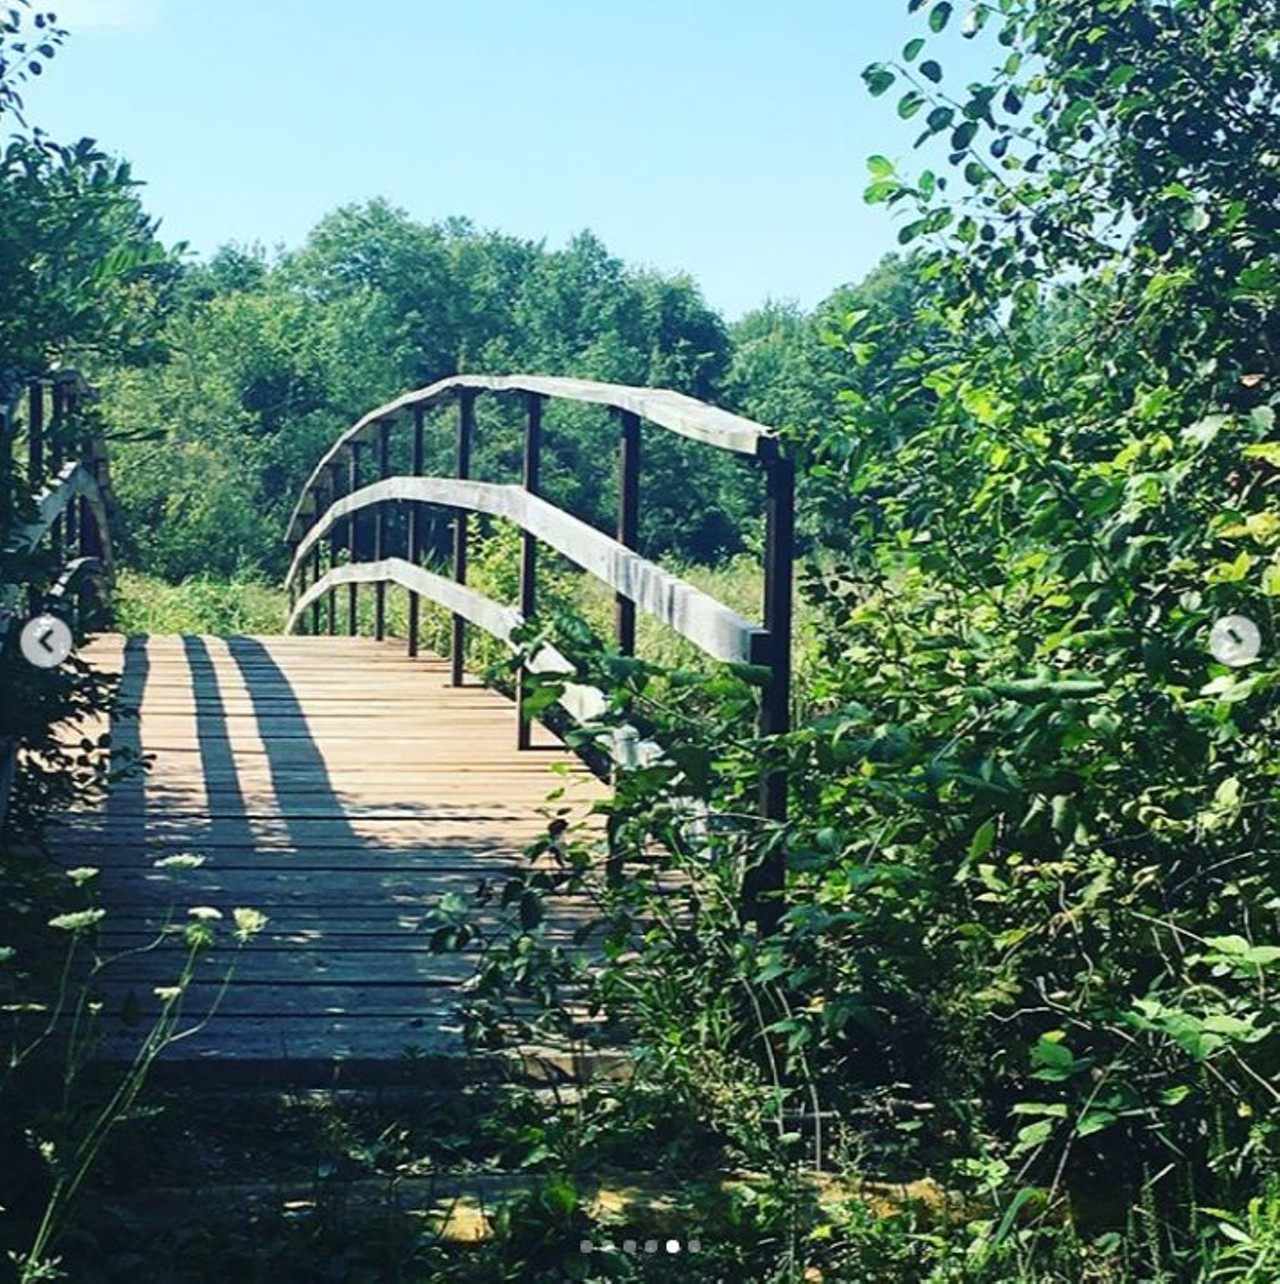 Algonac State Park
Marine City
This park is 1,500 acres and has lots of densely wooded and very lush trails. As an added feature this park has breathtaking views of the St. Clair River. 
Photo via Instagram user @take_a_hike_brooke